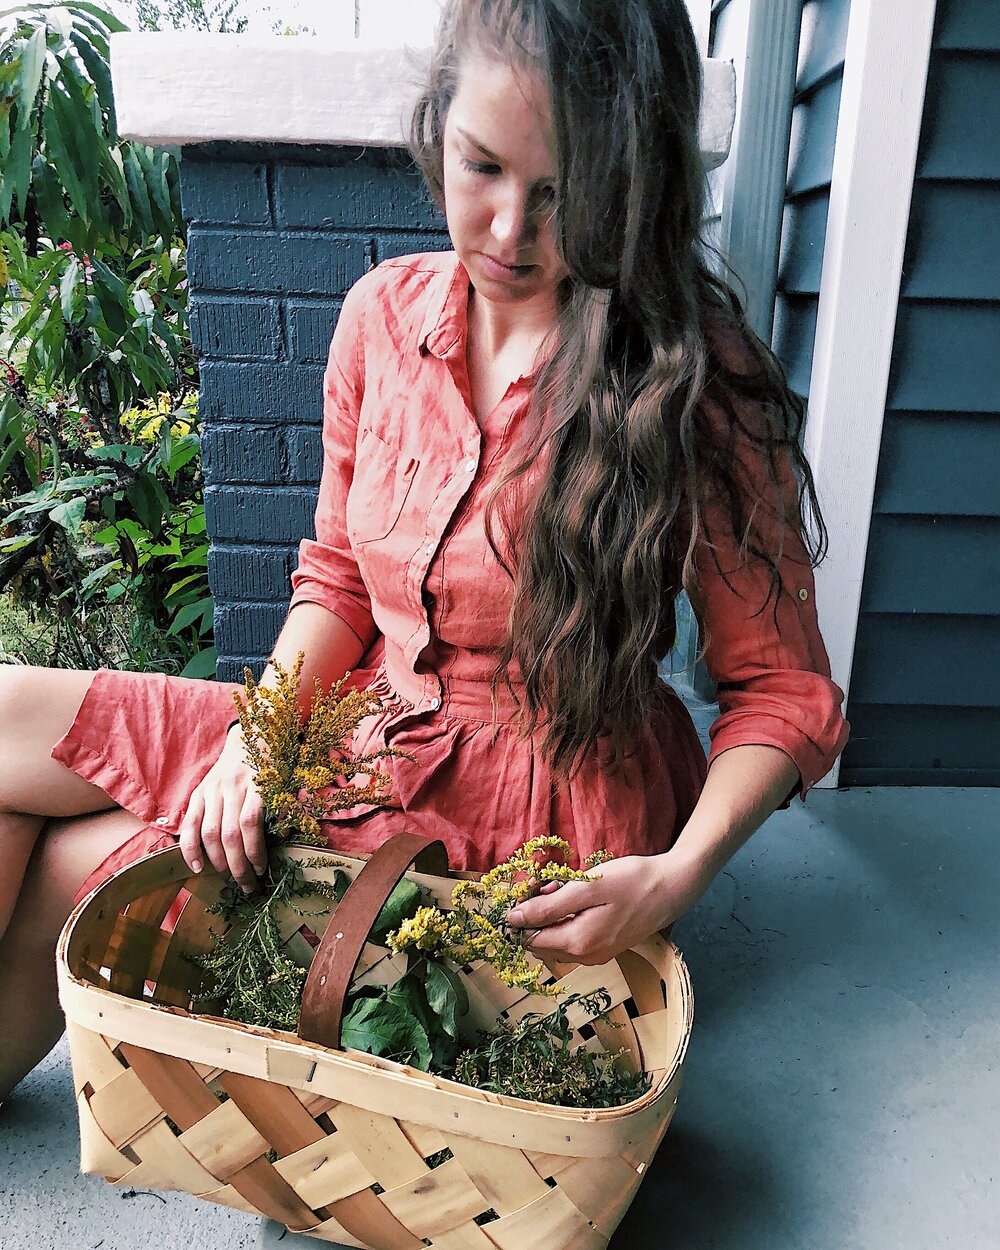 Meg Edwards owner of Flora Wellness, sits on her porch with foraged remedy ingredients in a basket.  photo credit Flora Wellness